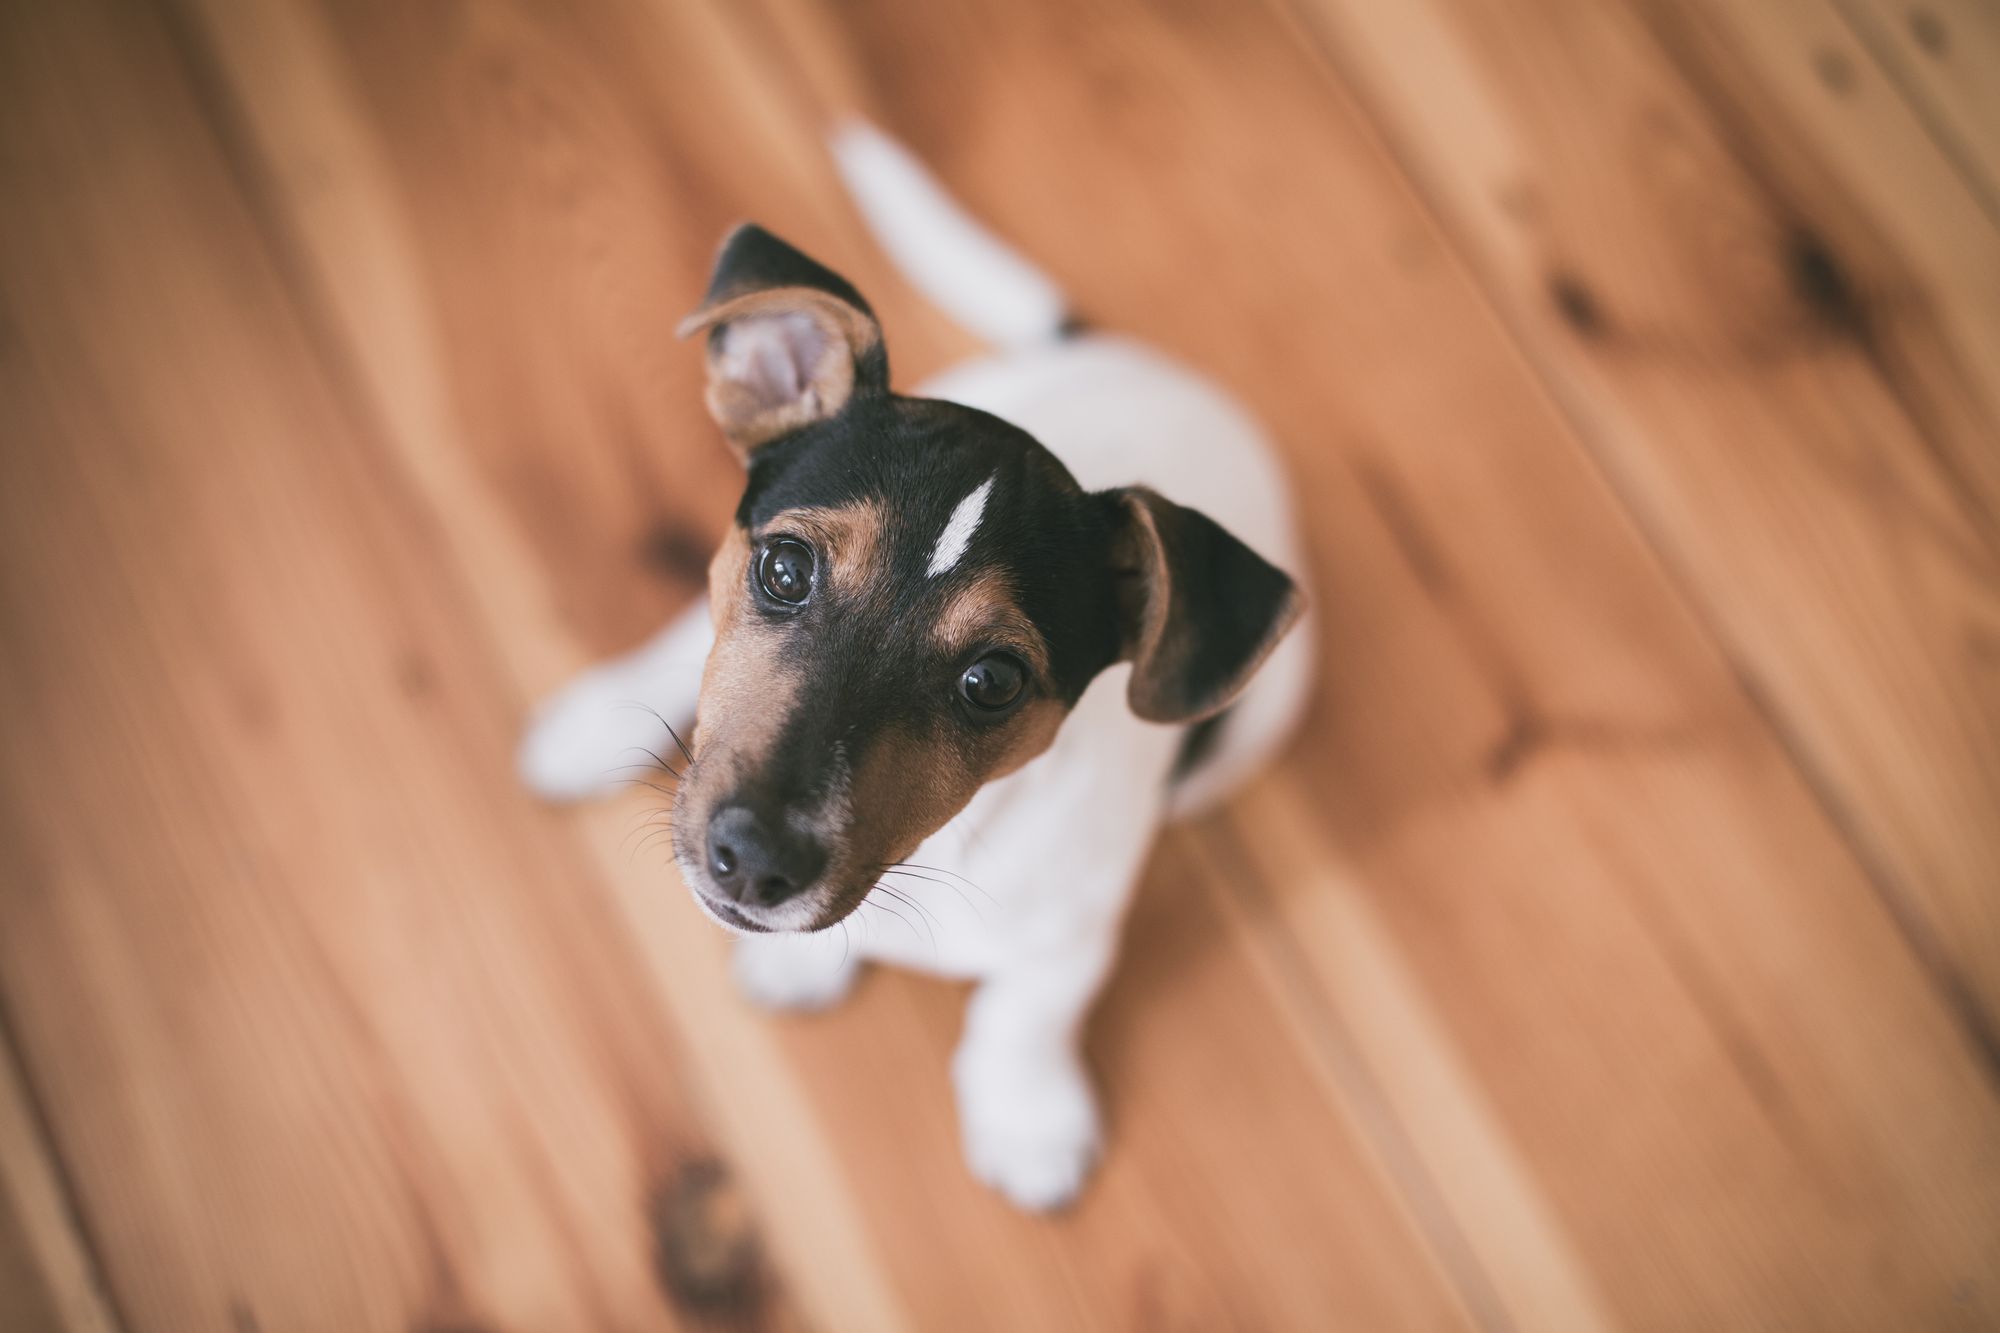 Tips for teaching your dog how to stay